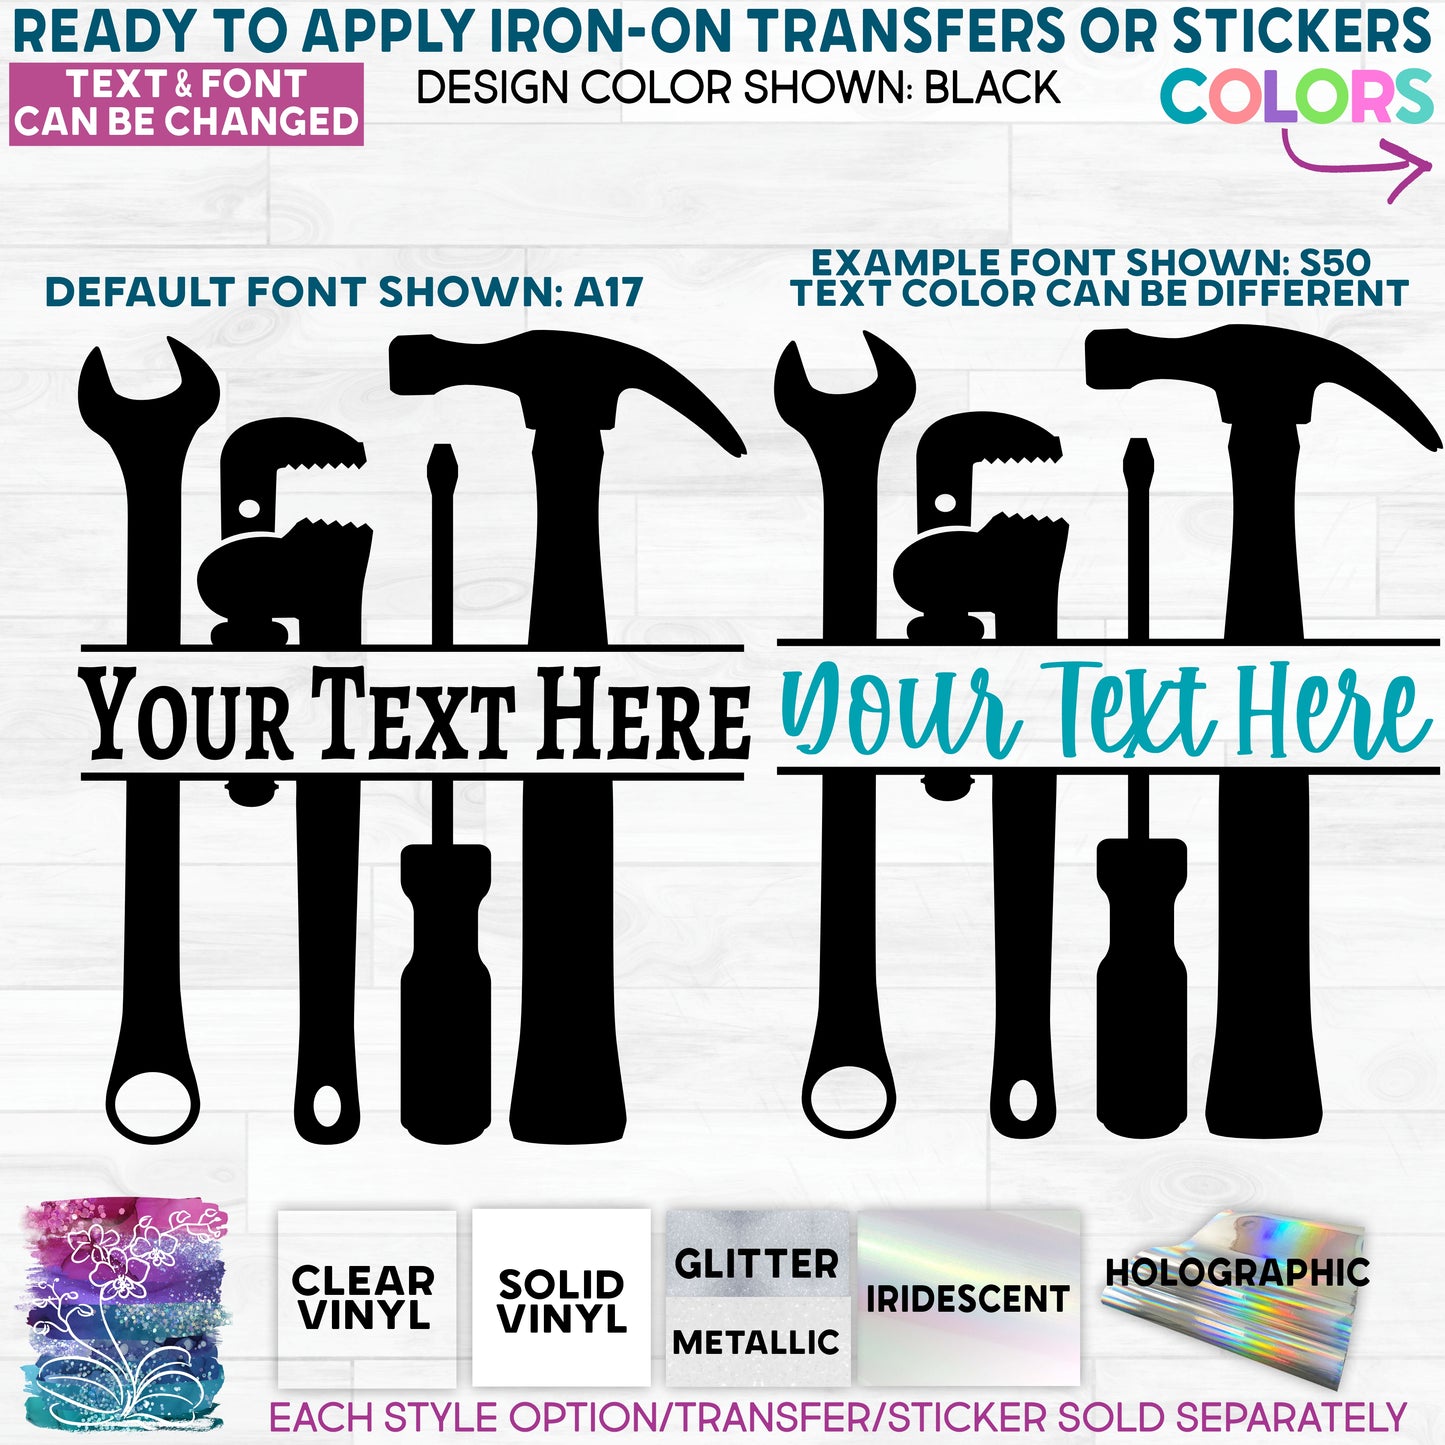 s288-A Tools Handyman Split Text Name Made-to-Order Iron-On Transfer or Sticker